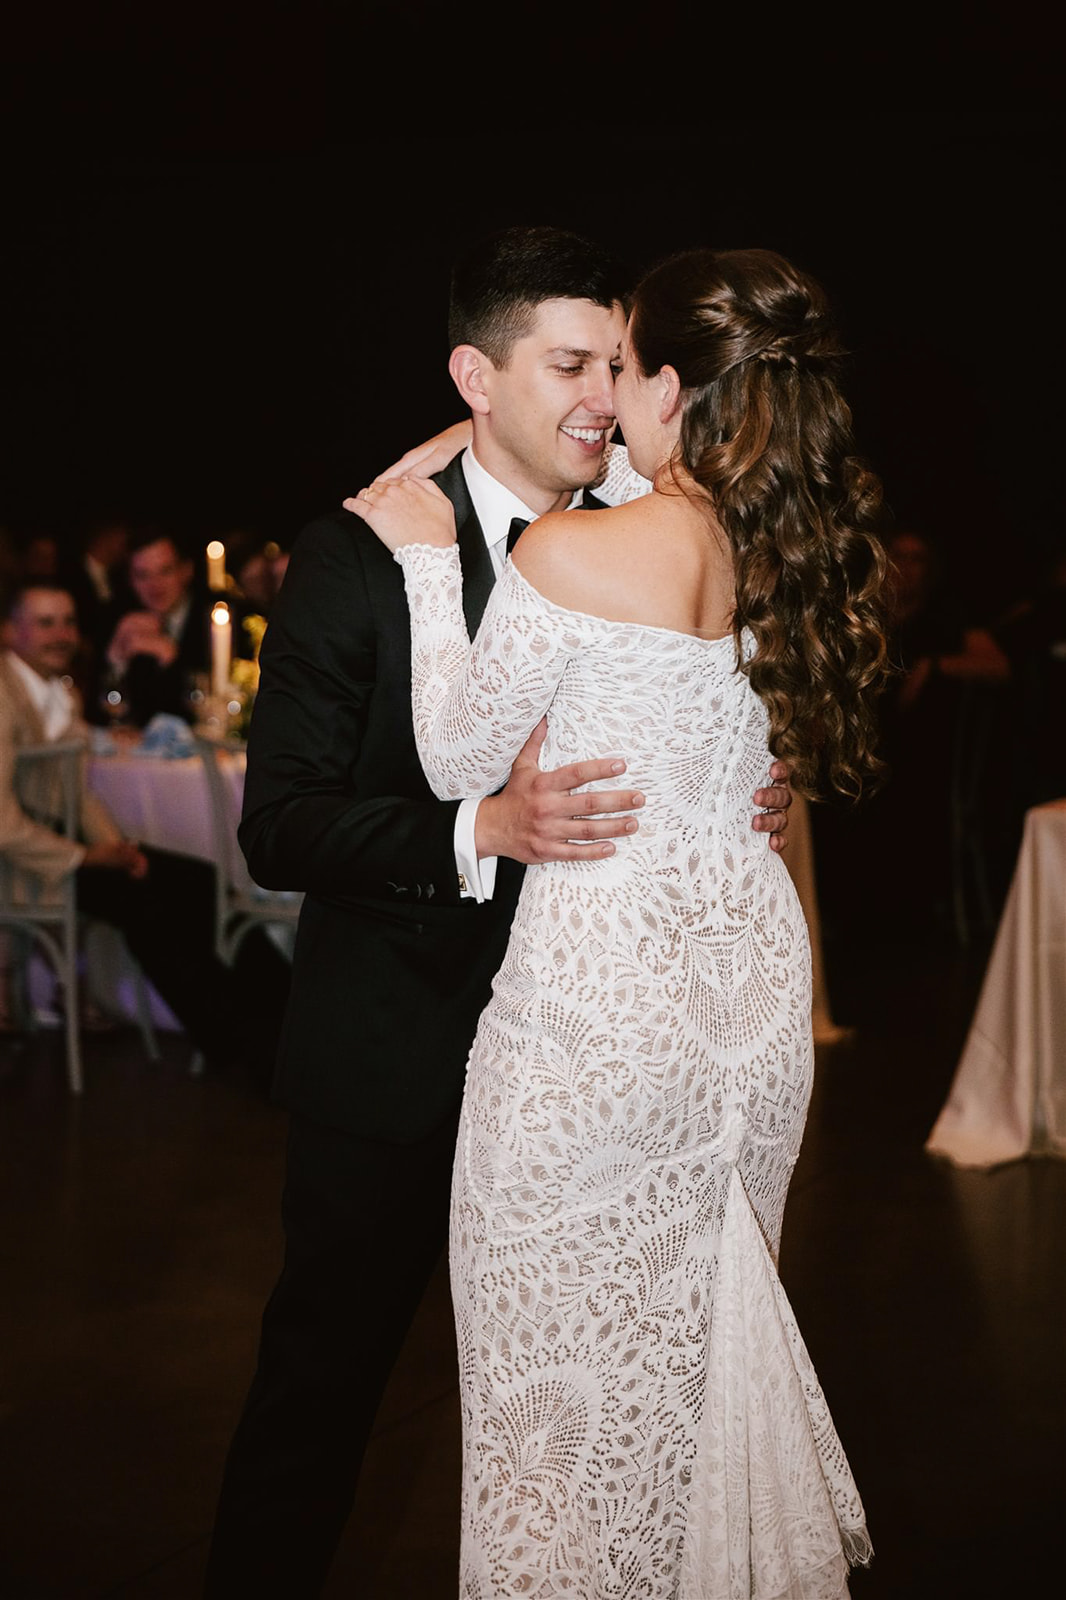 Bride and groom's magical first dance at Walden Chicago, radiating love and joy.